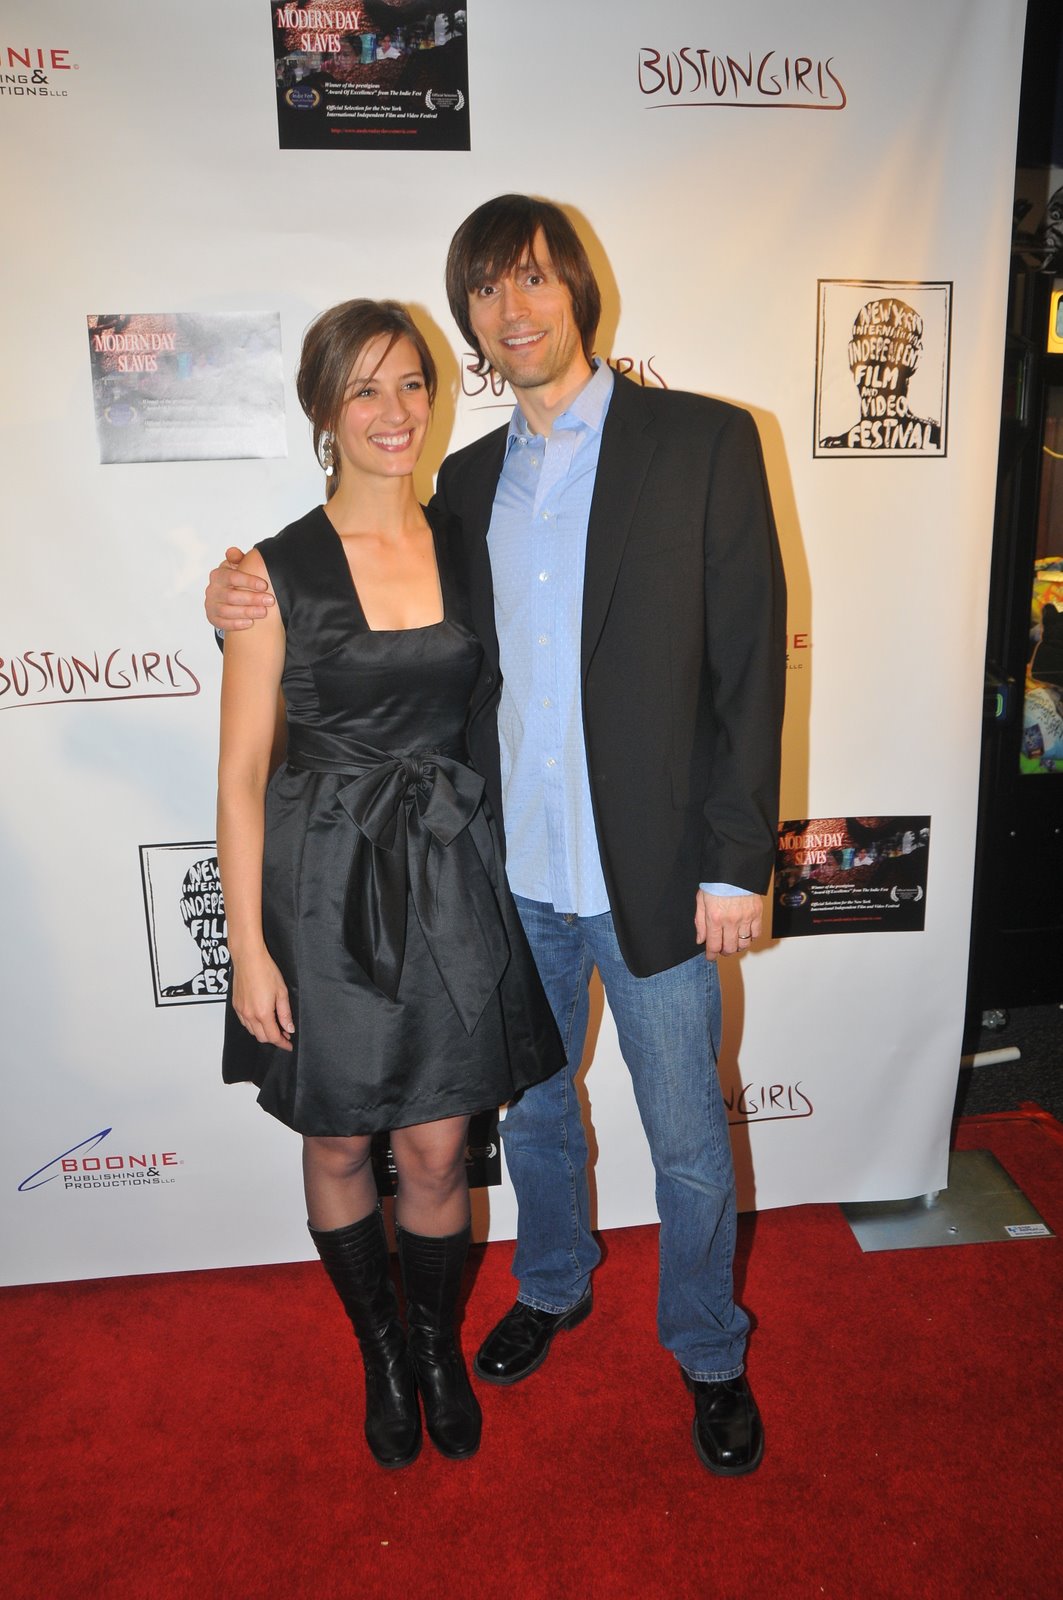 Producers Maggie and Hamish McCollester at the L.A. premiere of their indie comedy feature Jason's Big Problem.